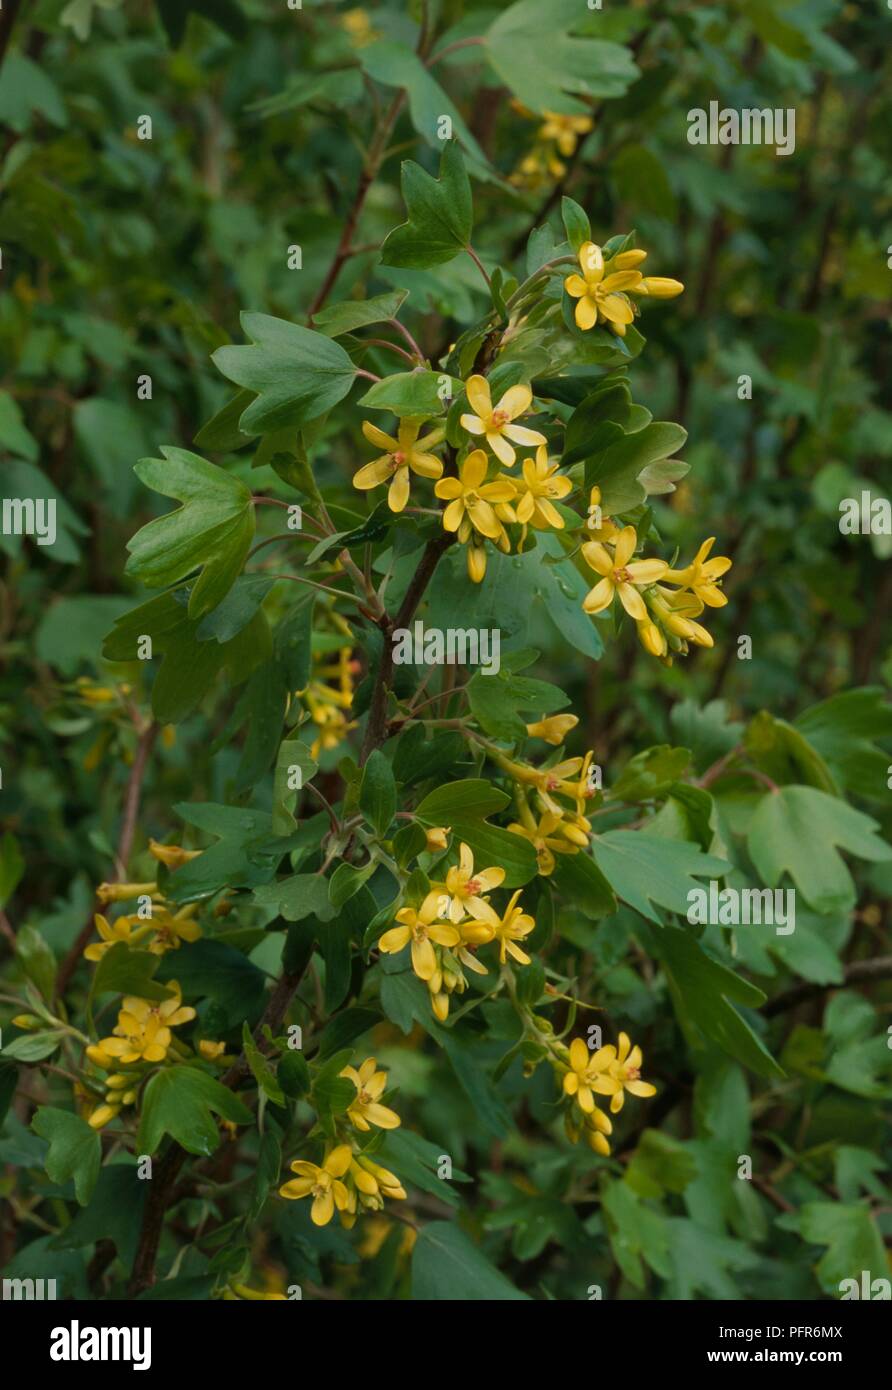 Leaves and flowers from Ribes odoratum (Buffalo currant), close-up Stock Photo